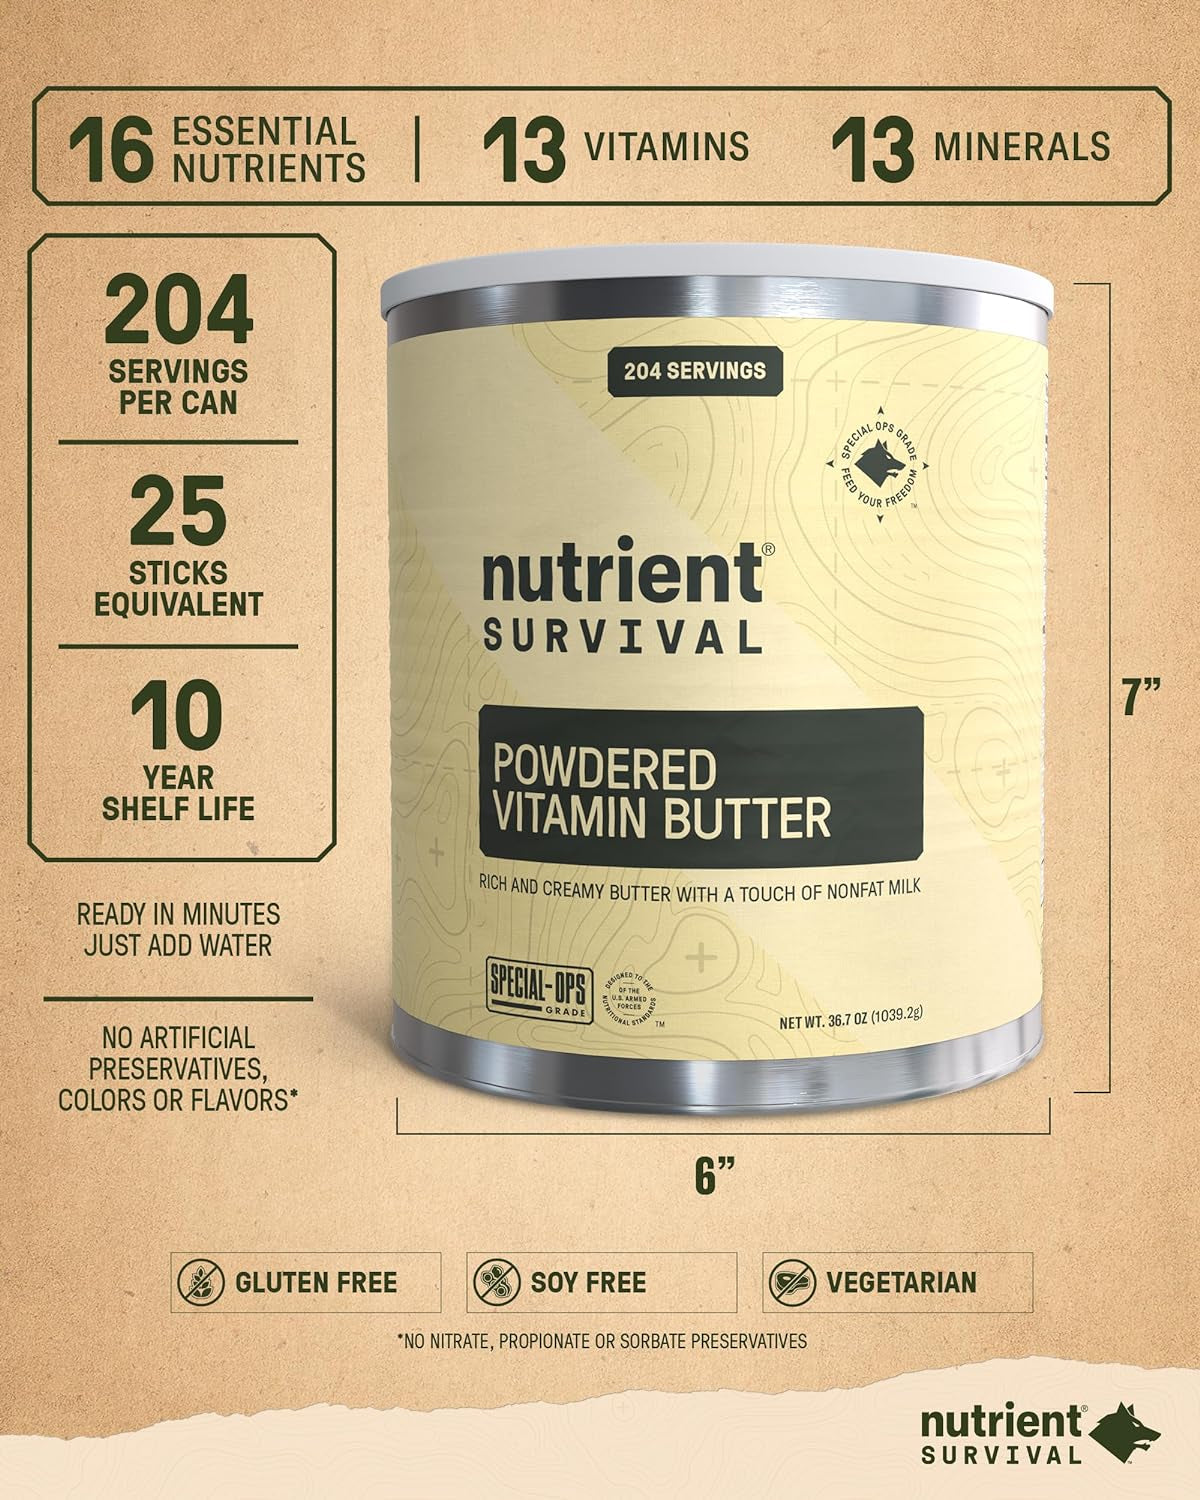 Vitamin Butter Powder, Freeze Dried Prepper Supplies & Emergency Food Supply, 16 Essential Nutrients, Soy & Gluten Free, Shelf Stable up to 10 Years, One Can, 204 Servings